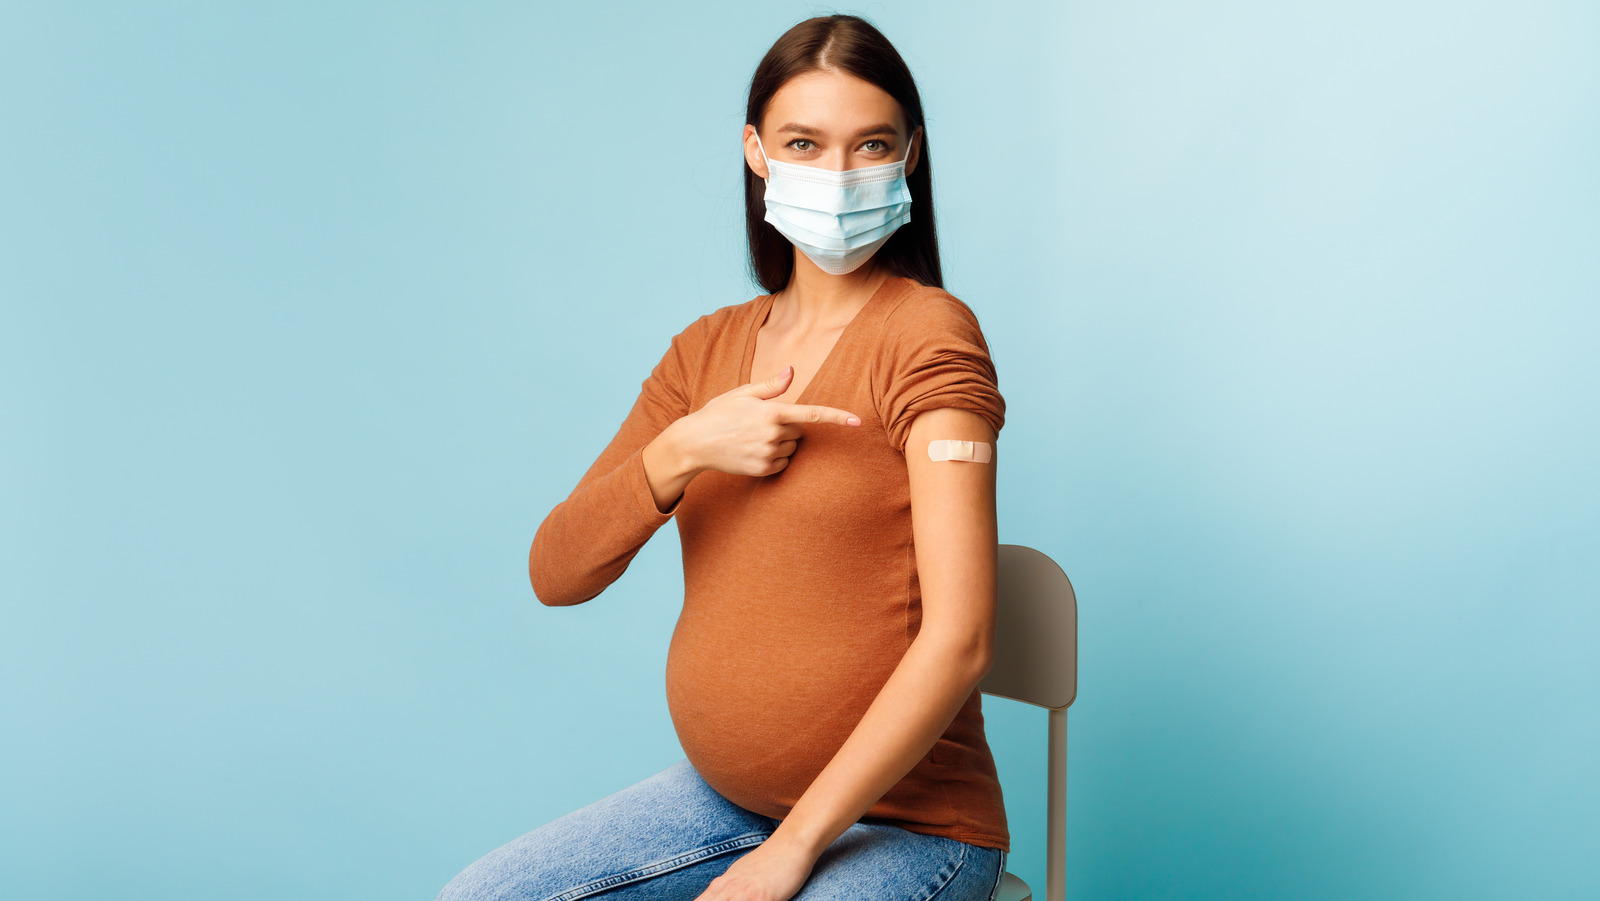 Are Pregnant Women who receive the COVID-19 Vaccine able to pass protection on to their babies?